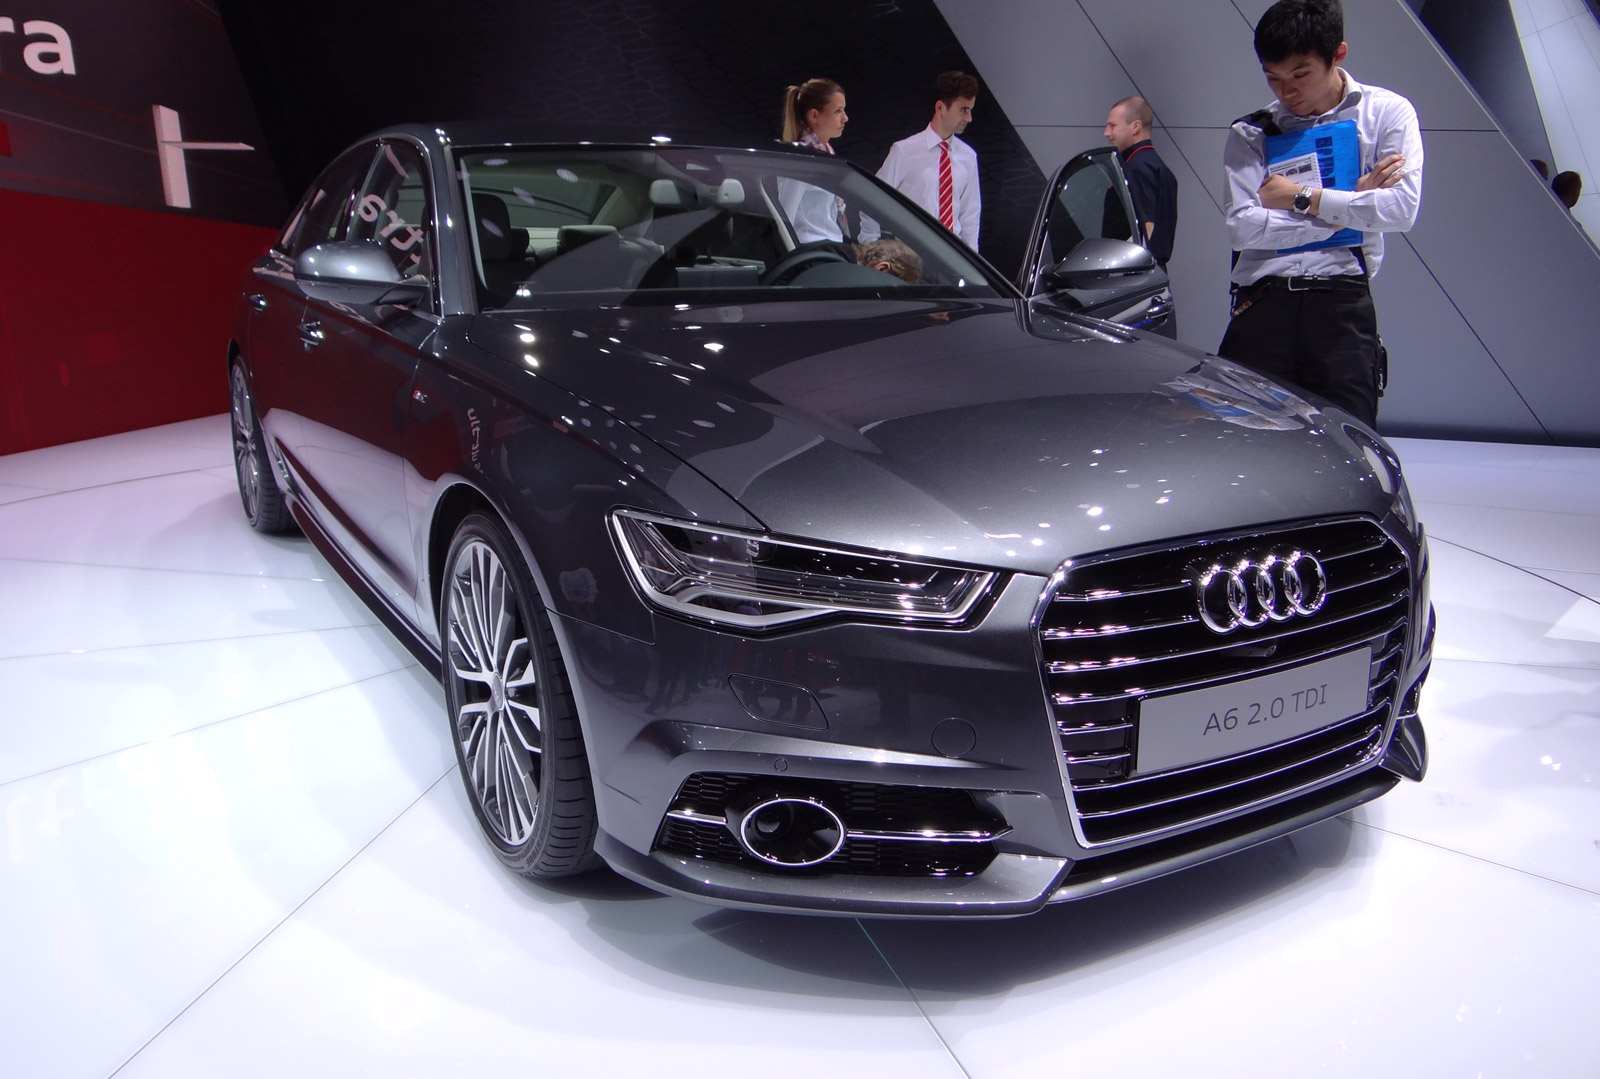 16 Audi A6 And S6 Full Details Live Photos And Video